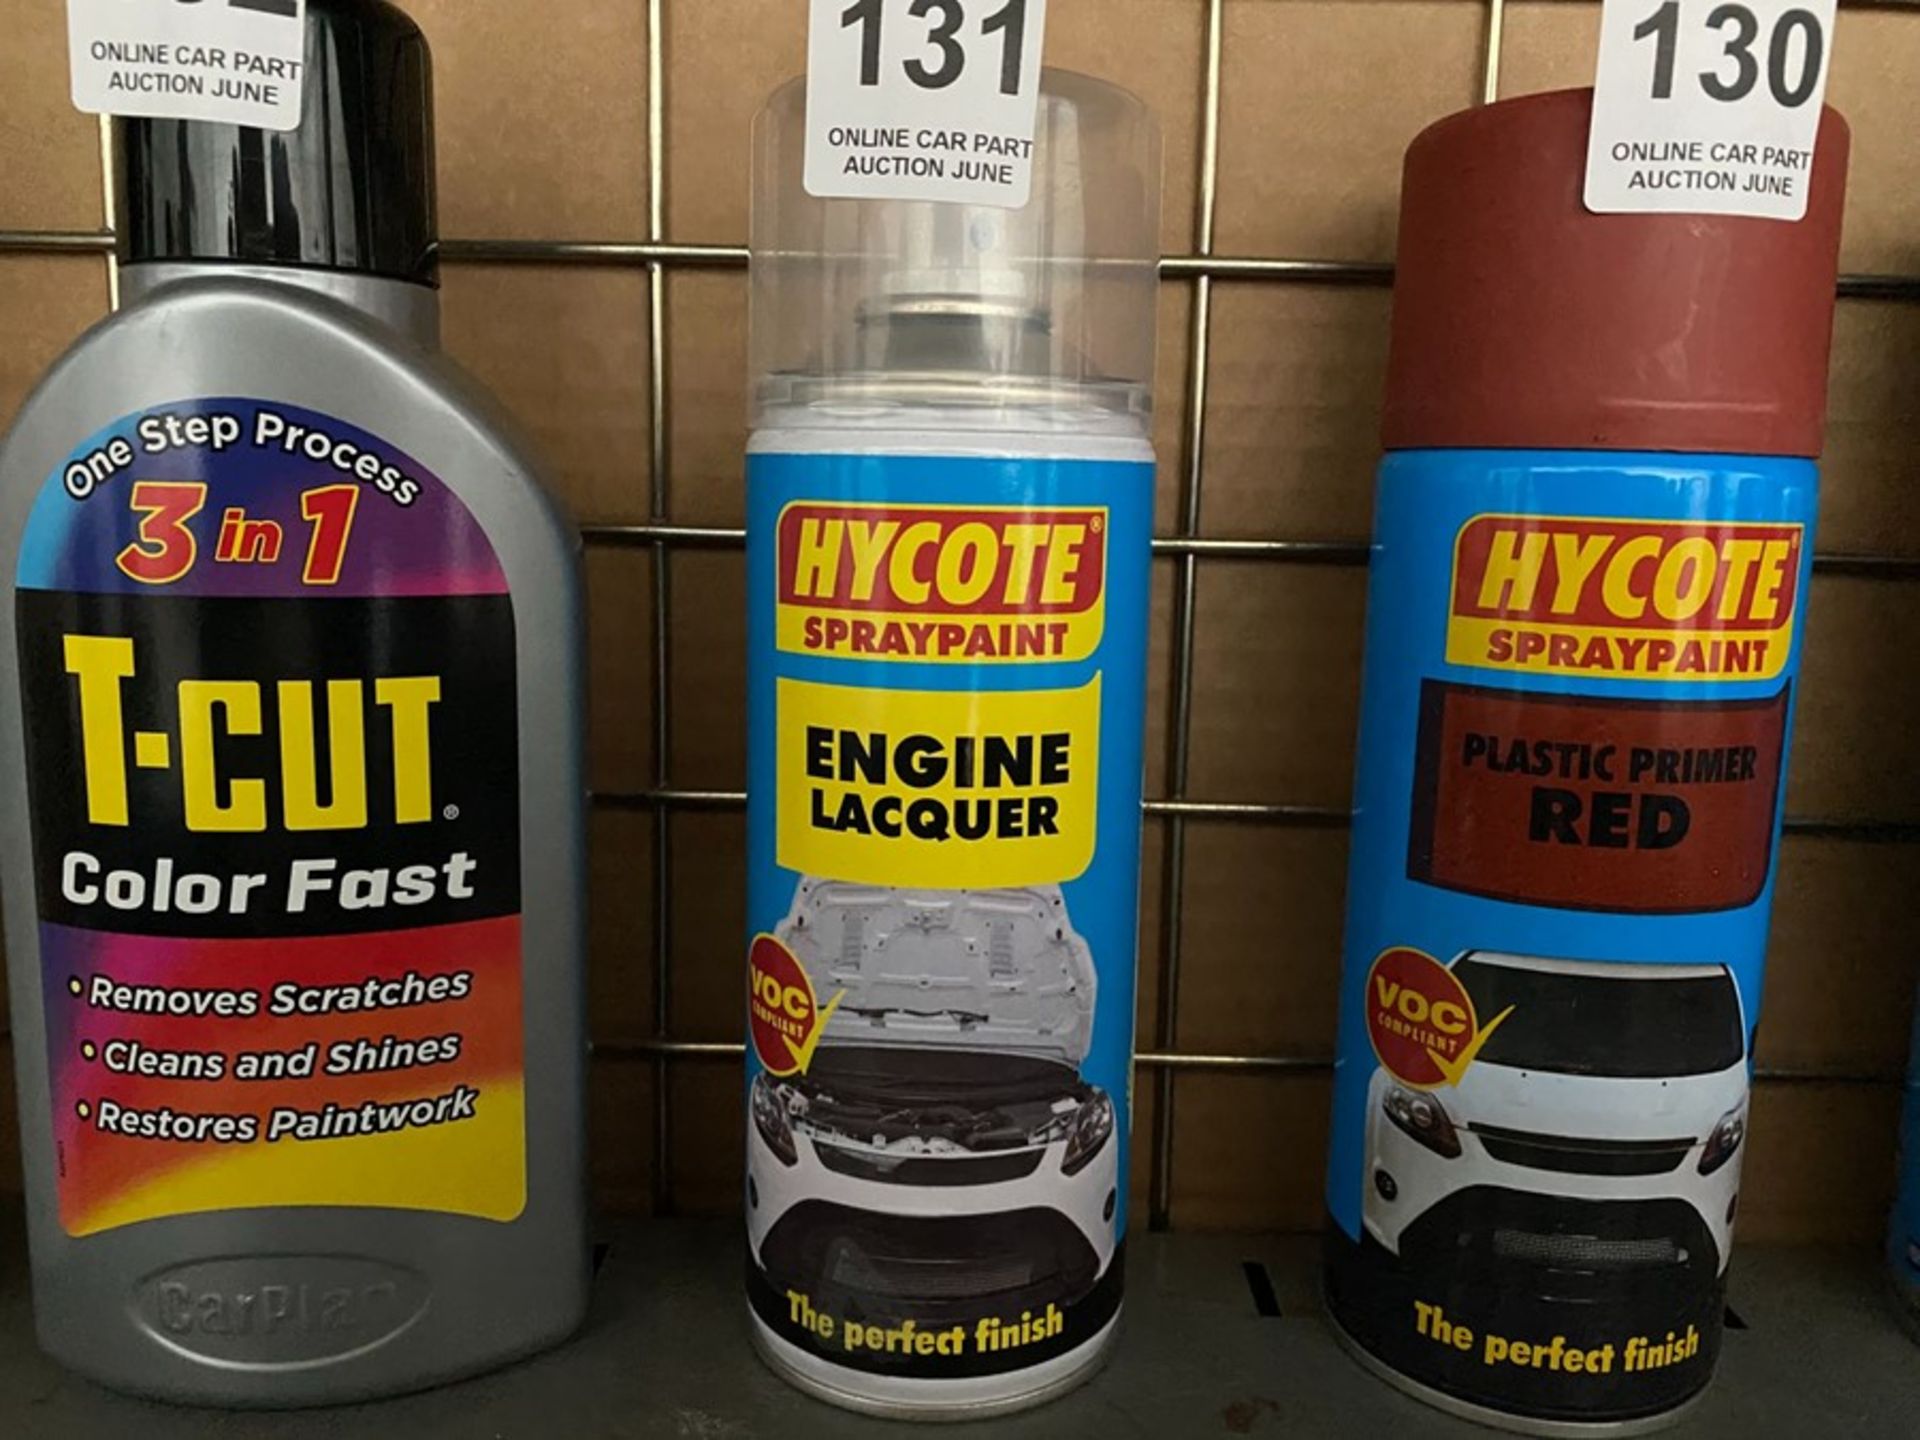 HYCOTE ENGINE LACQUER (NEW)